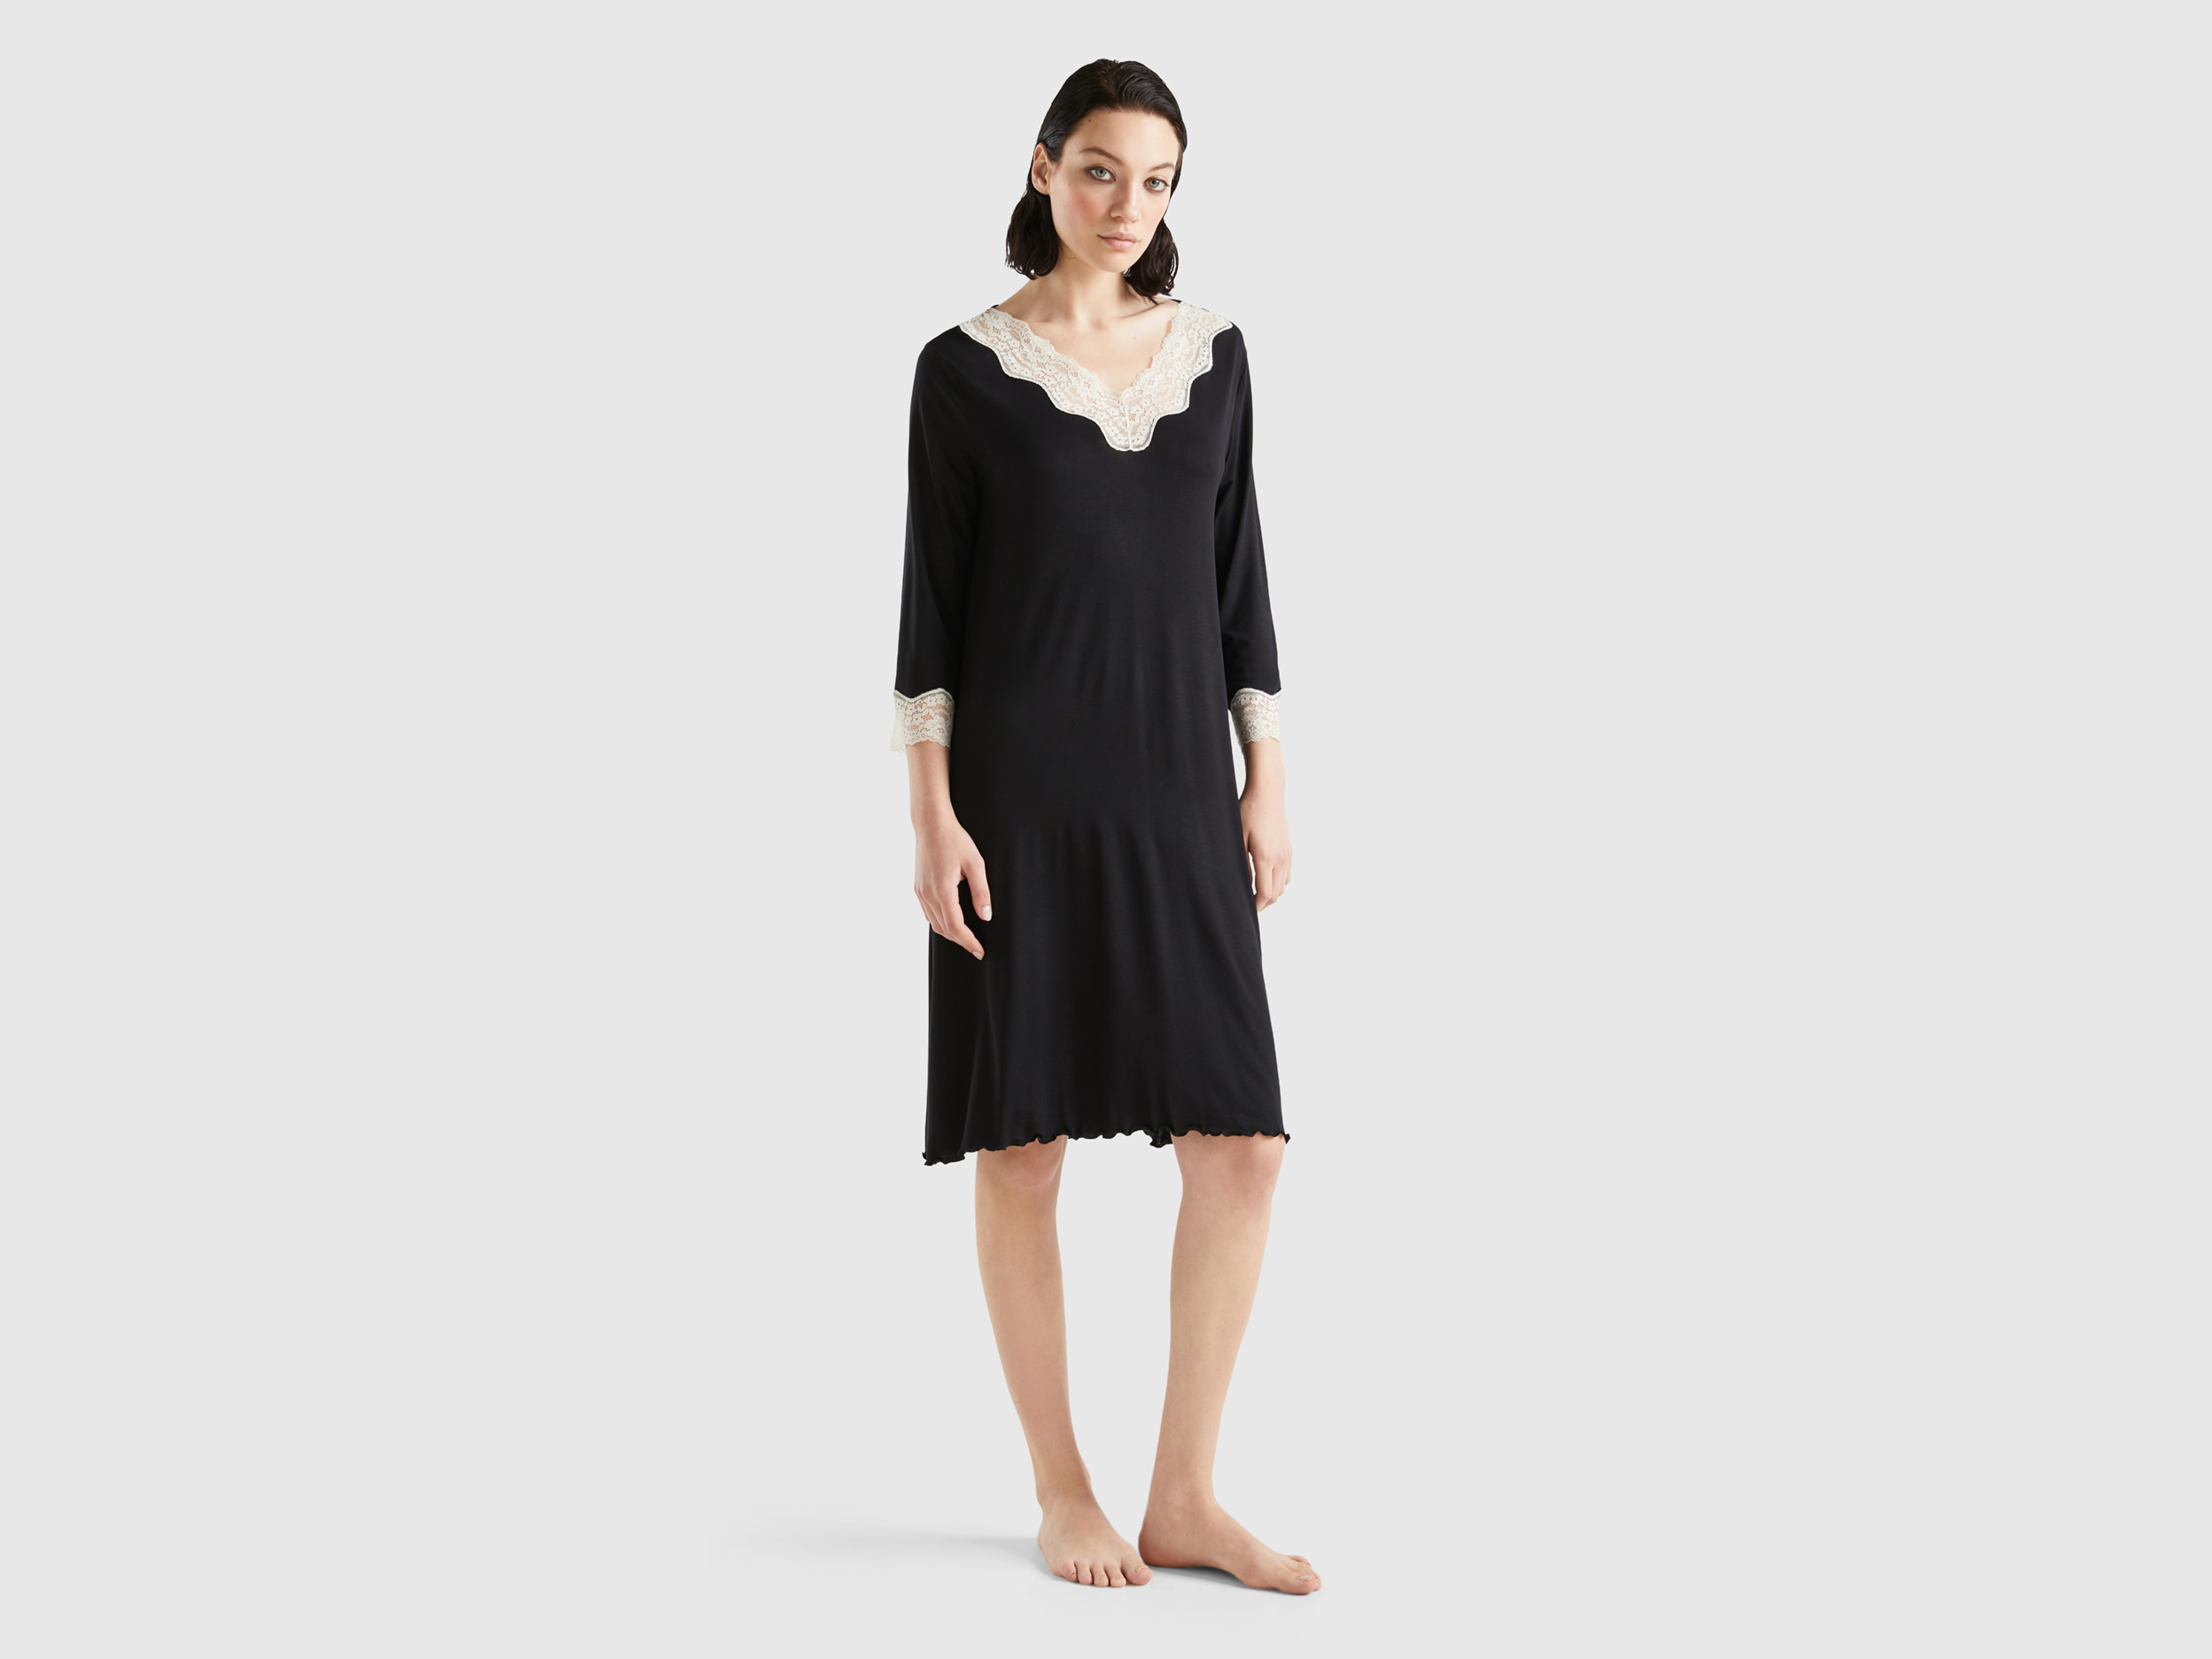 Benetton, Nightshirt With Lace Details, size S, Black, Women